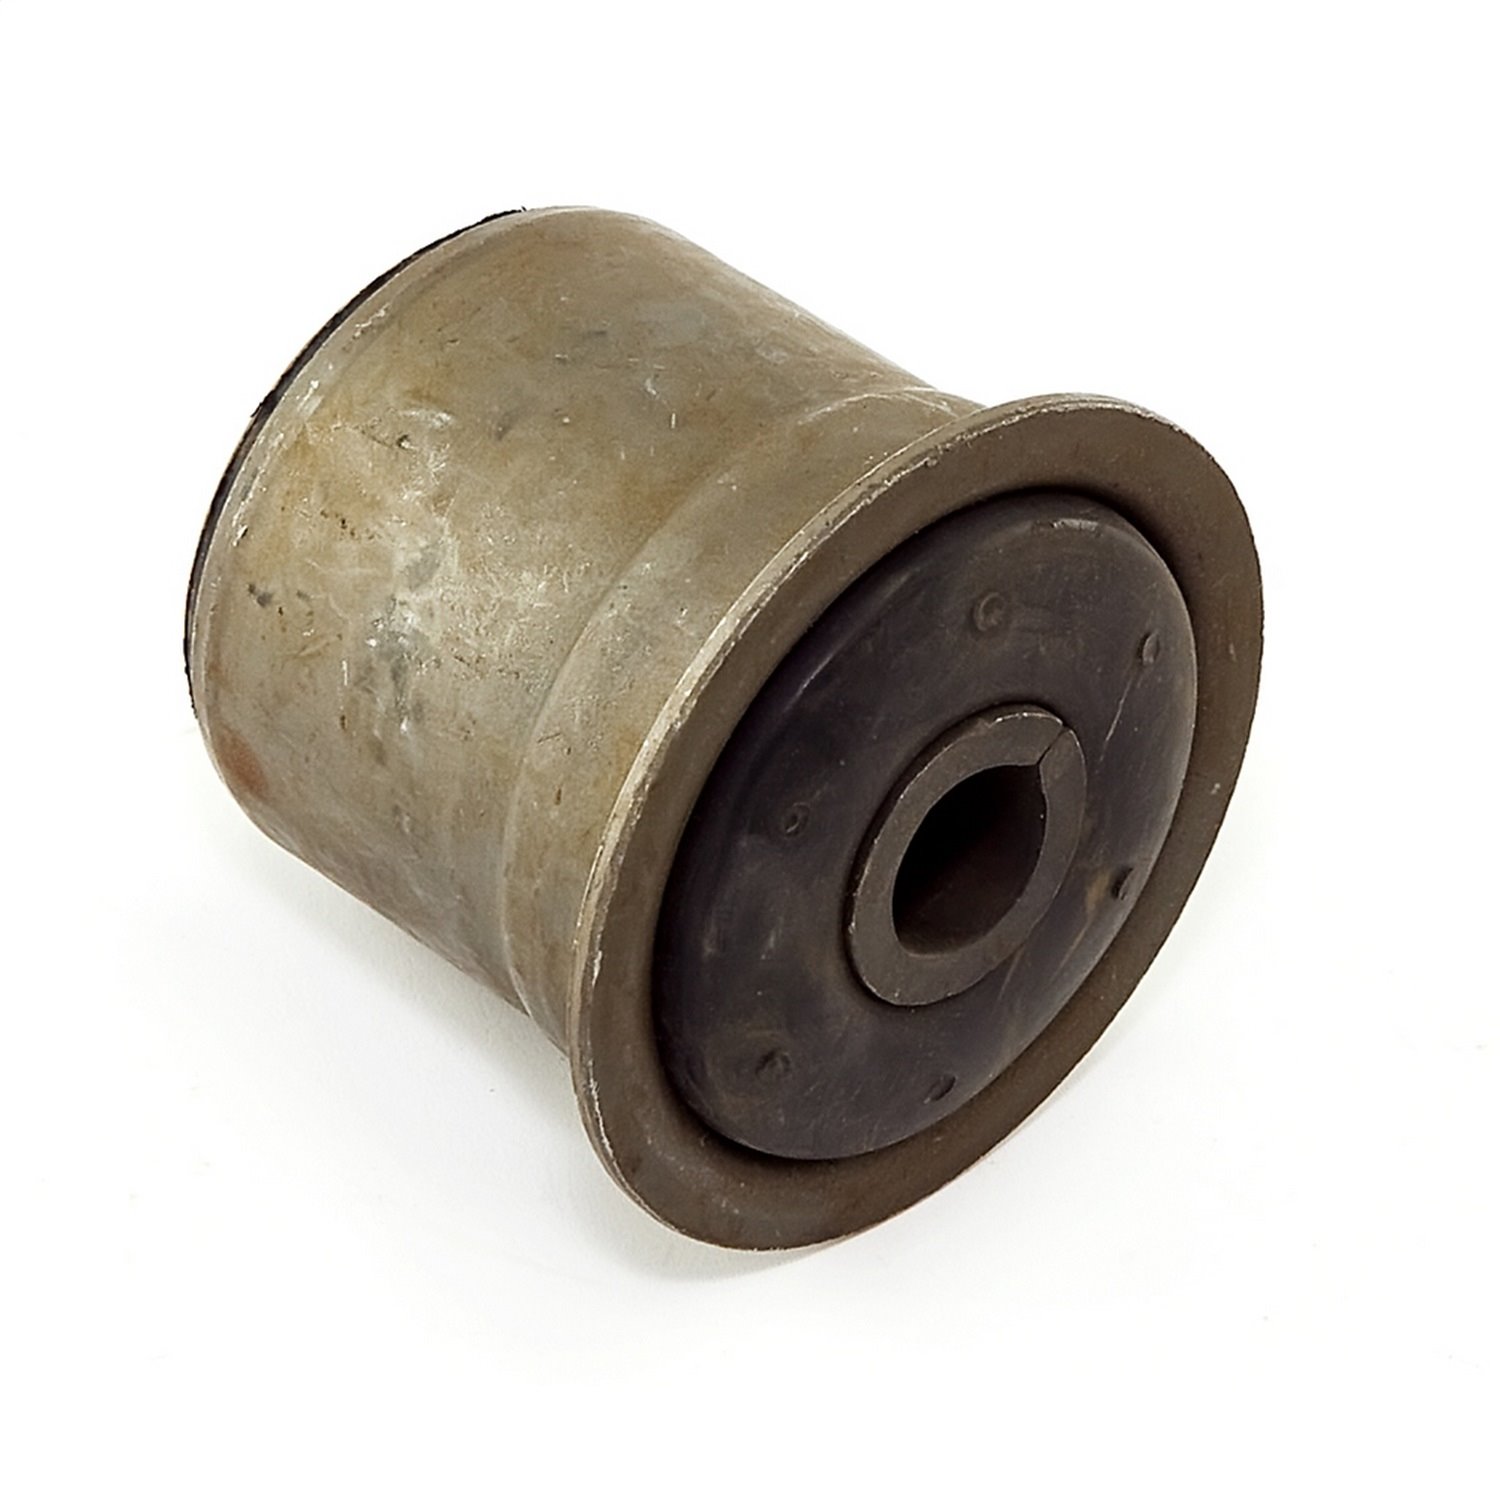 Replacement front upper control arm bushing from Omix-ADA, Fits 84-90 Jeep Cherokee XJ